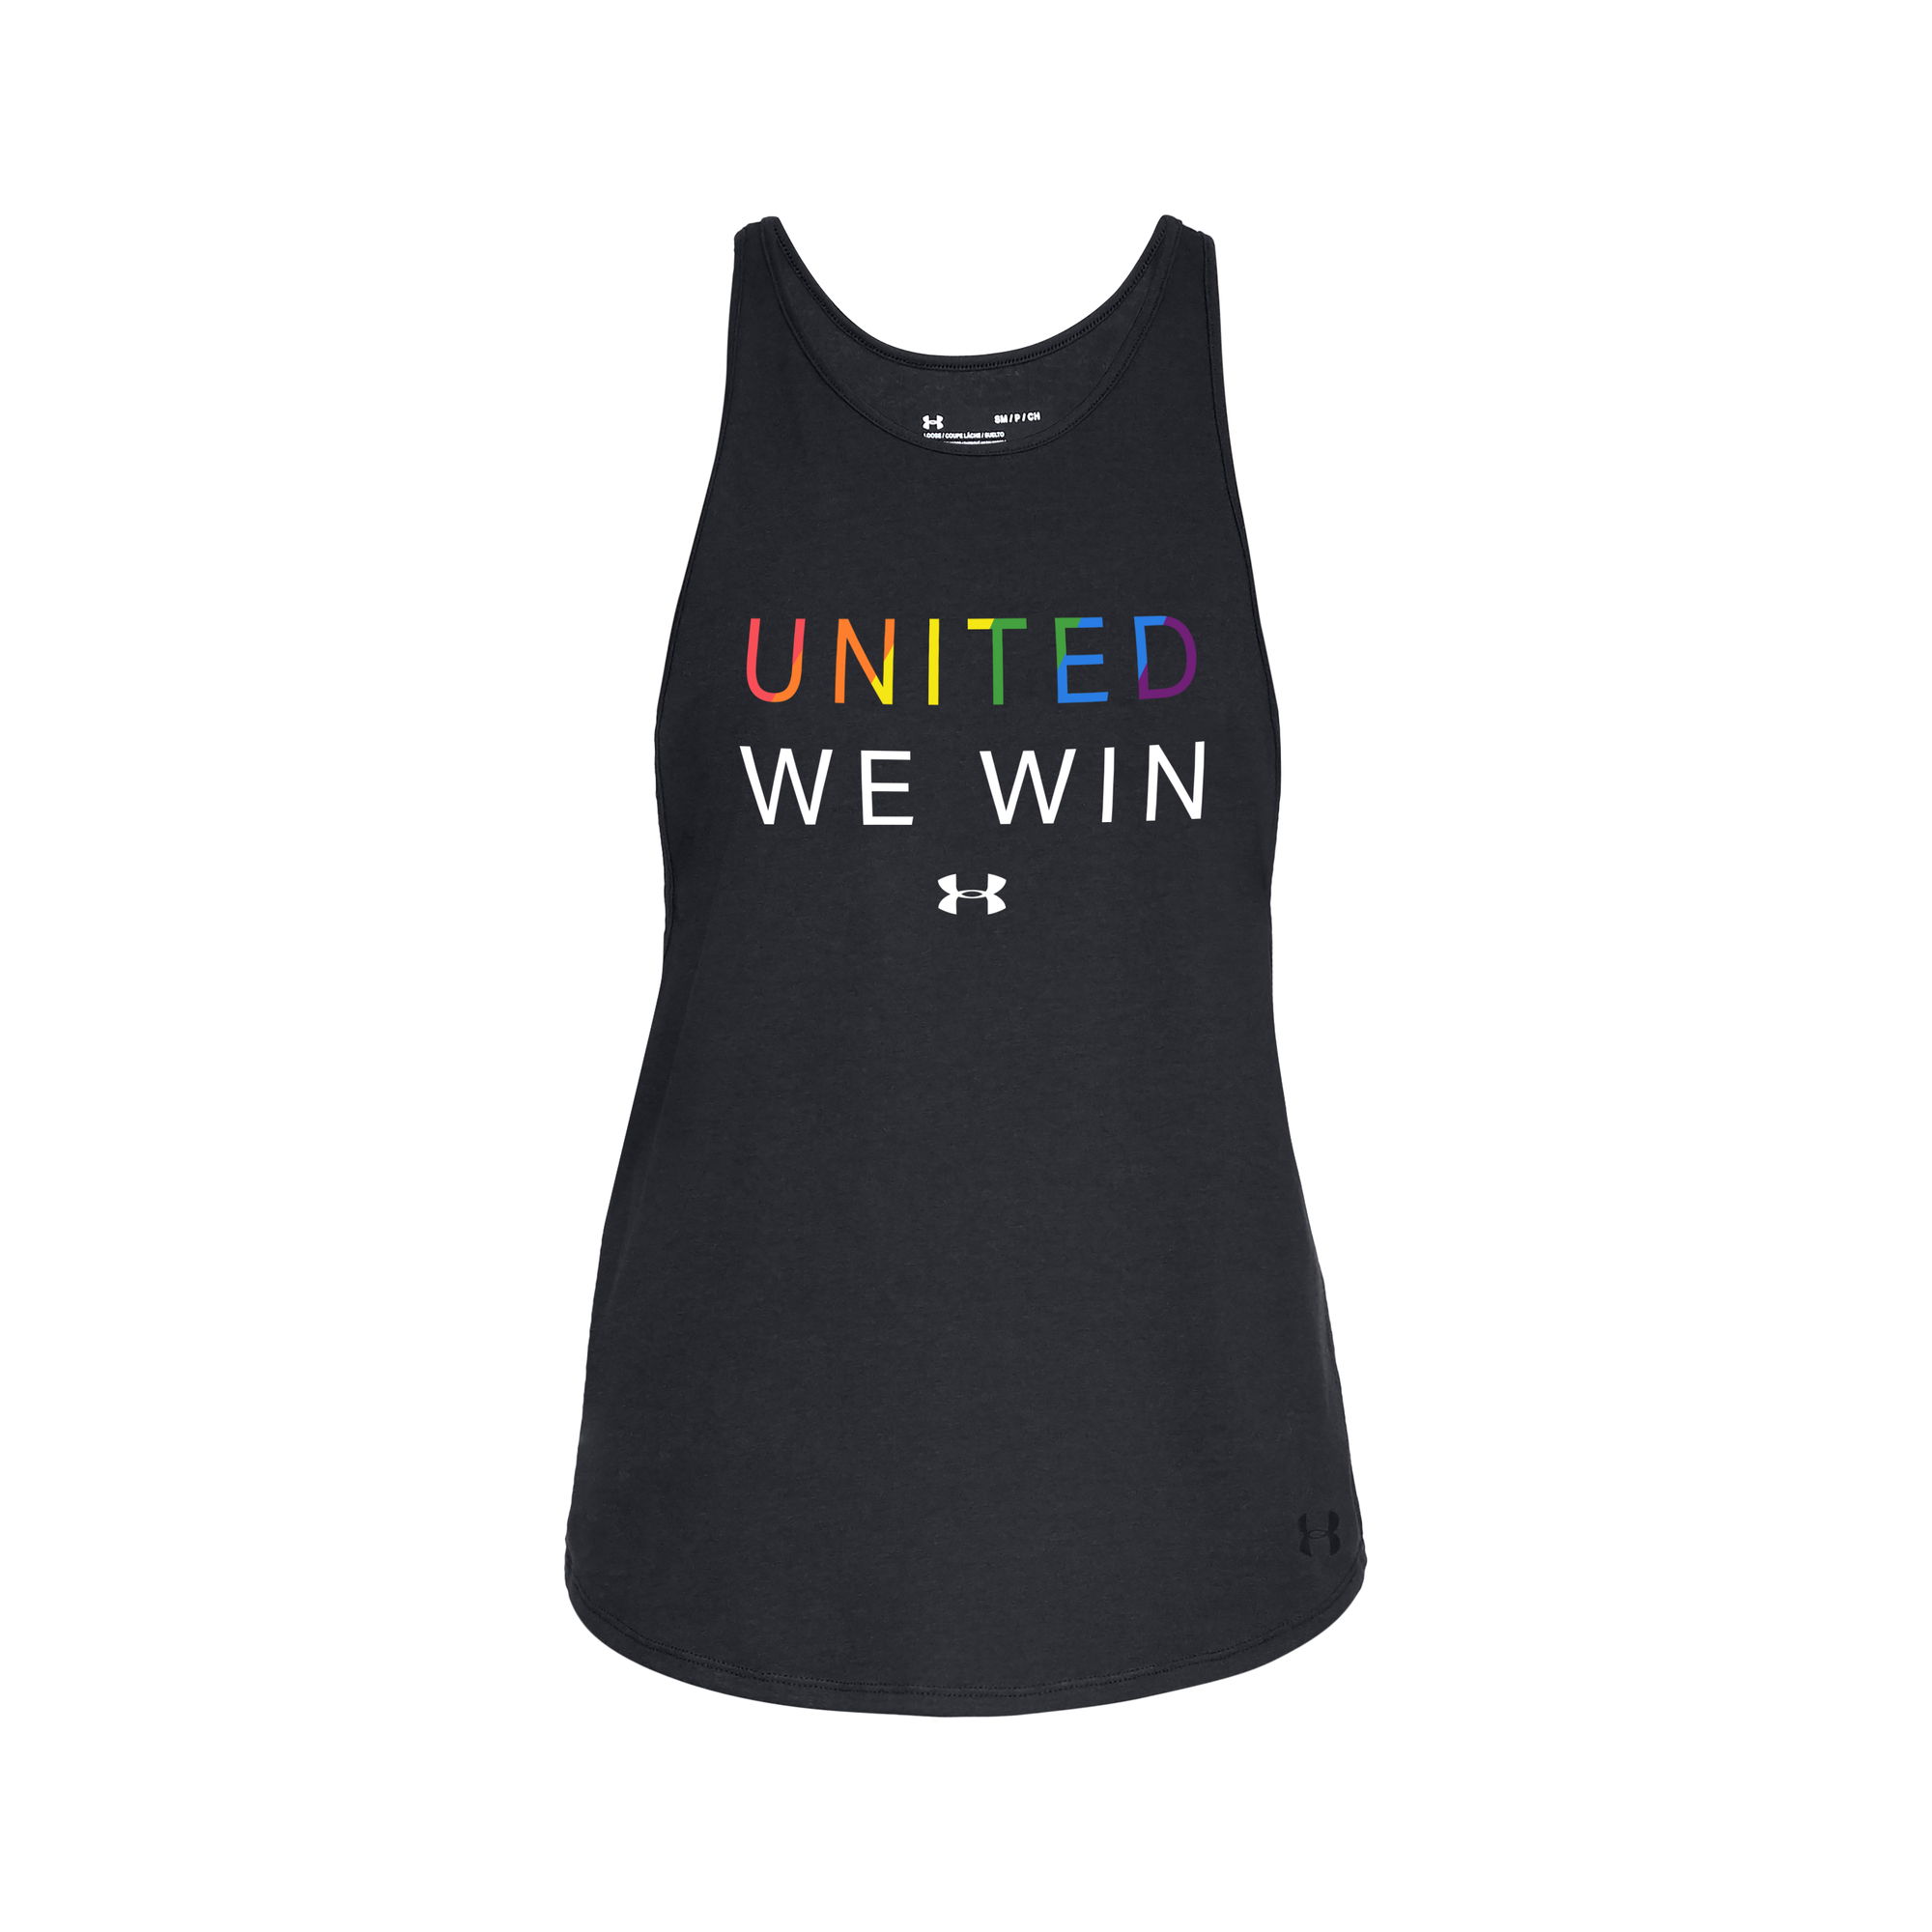 Under Armour pride collection tank